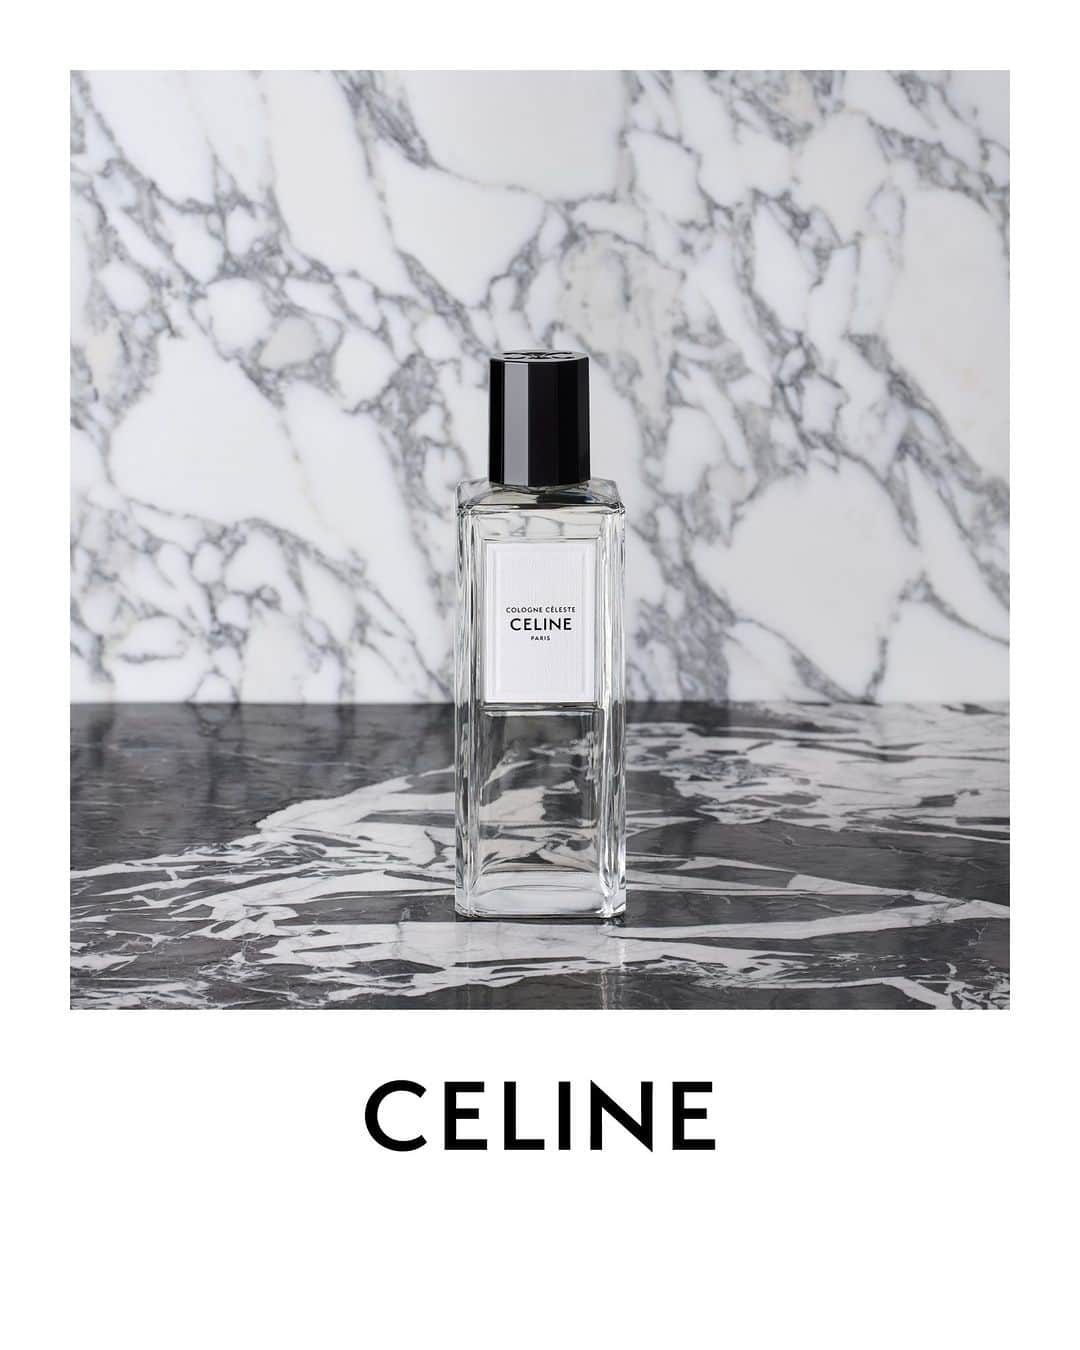 Celineのインスタグラム：「CELINE HAUTE PARFUMERIE  CELINE INTRODUCES COLOGNE CÉLESTE, AN ESSENTIAL COMPOSITION IN PERFUMERY, REINTERPRETED BY HEDI SLIMANE. THIS EAU DE COLOGNE, SIMULTANEOUSLY UNIVERSAL AND COMFORTING, COMES WITH THREE PRODUCTS TO ENRICH THE BATH AND BODY COLLECTION INITIATED BY THE SOLID SOAPS IN JUNE 2023. HIGHLY PERFUMED, EACH ONE FAITHFULLY RECAPTURES COLOGNE CÉLESTE’S OLFACTORY SIGNATURE:  -L’HUILE CÉLESTE – PERFUMED OIL FOR BODY AND HAIR -LE LAIT CÉLESTE POUR LE BAIN – PERFUMED BATH MILK -LE SAVON SOLIDE PARFUMÉ – PERFUMED SOLID SOAP   NOTES: ANGELICA, SWEET LEMON ESSENCE, PETITGRAIN, NEROLI, AMBRETTE BUTTER AND ORRIS BUTTER.  COLLECTION AVAILABLE IN STORE AND ON CELINE.COM  @HEDISLIMANE PHOTOGRAPHY   #CELINEHAUTEPARFUMERIE #CELINEBYHEDISLIMANE」